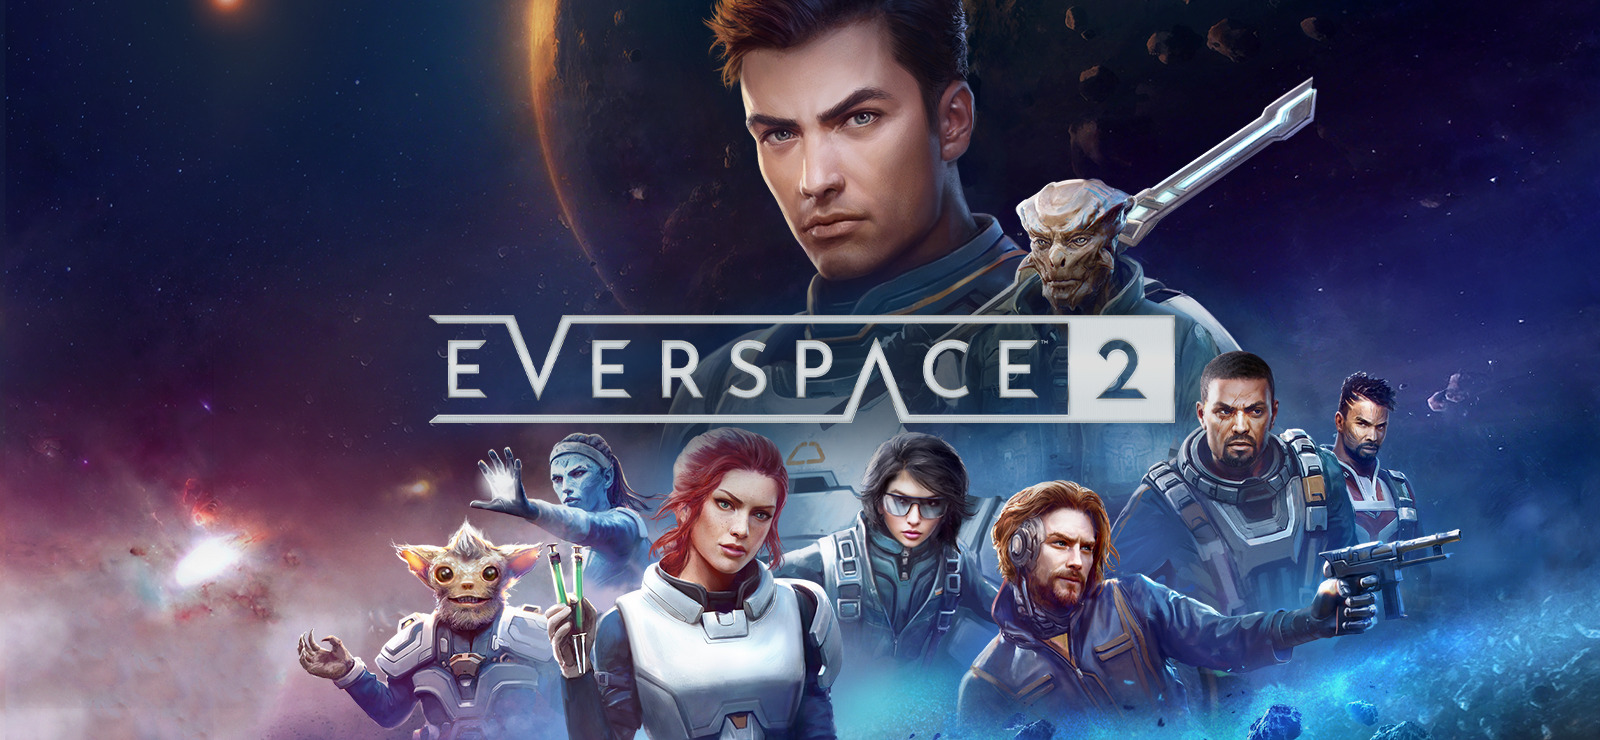 Space Everspace 2 will be available on Xbox and PlayStation in August